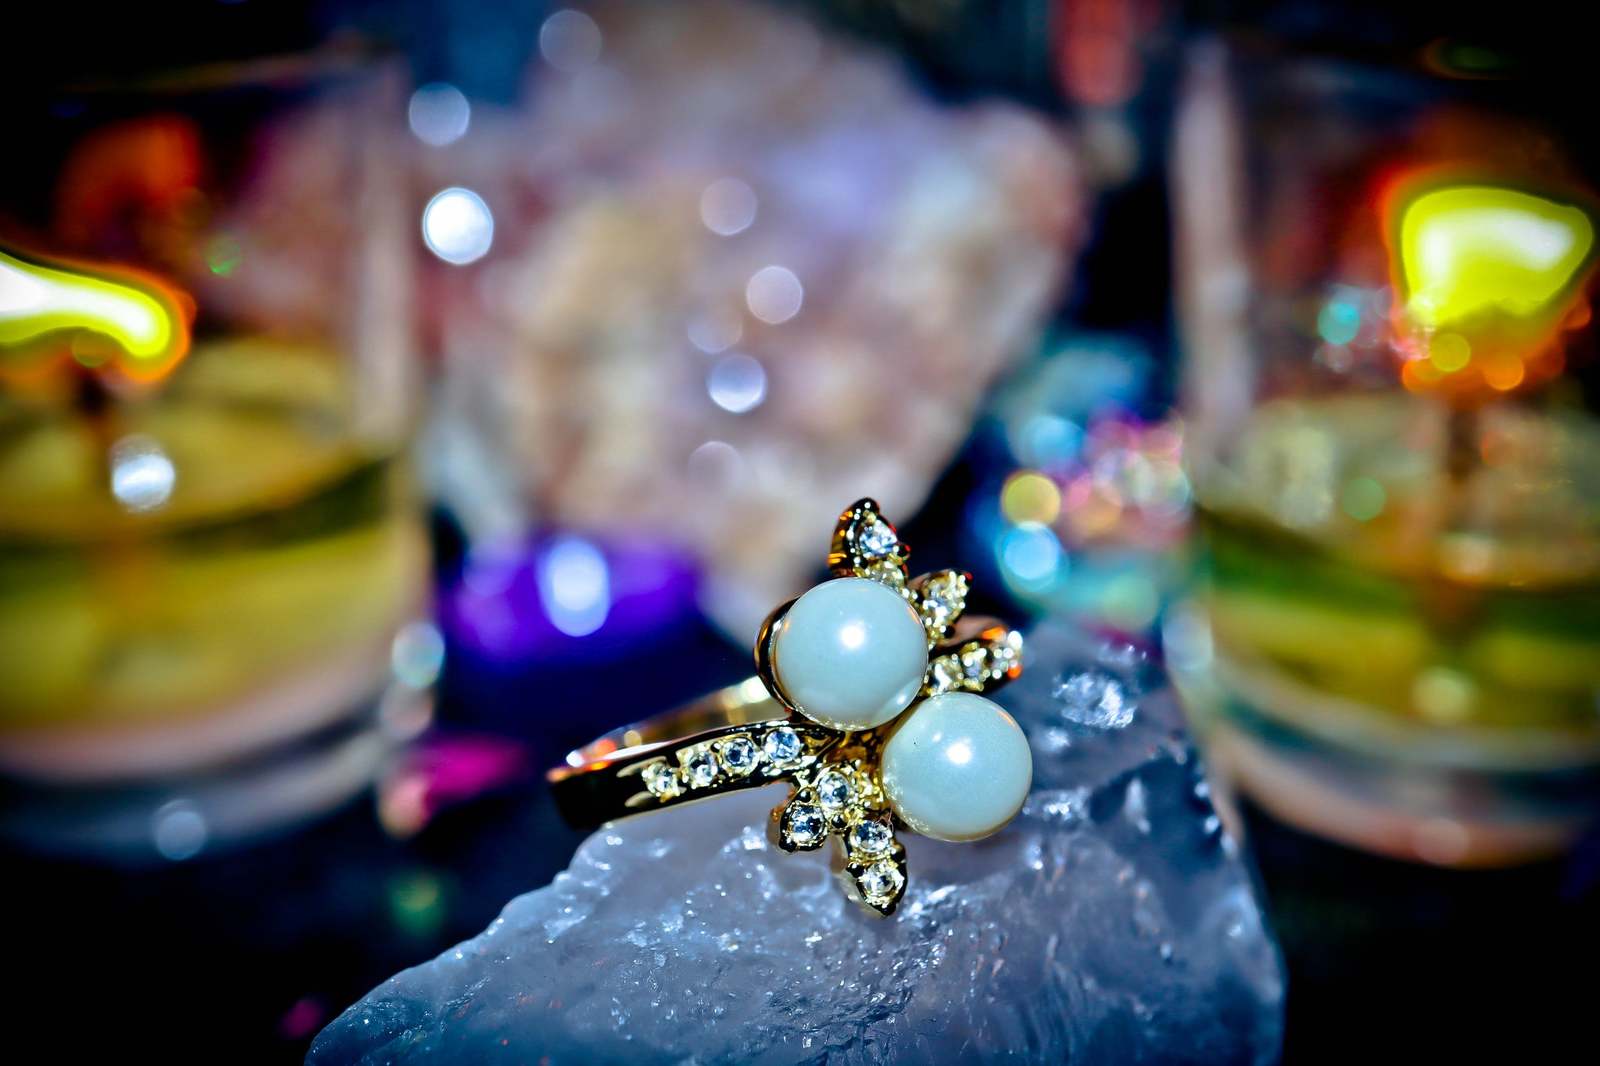 FOUNTAIN OF YOUTH Sacred Pearl Anti-Aging Spell Haunted Magic Gypsy Witch Ring - $55.00